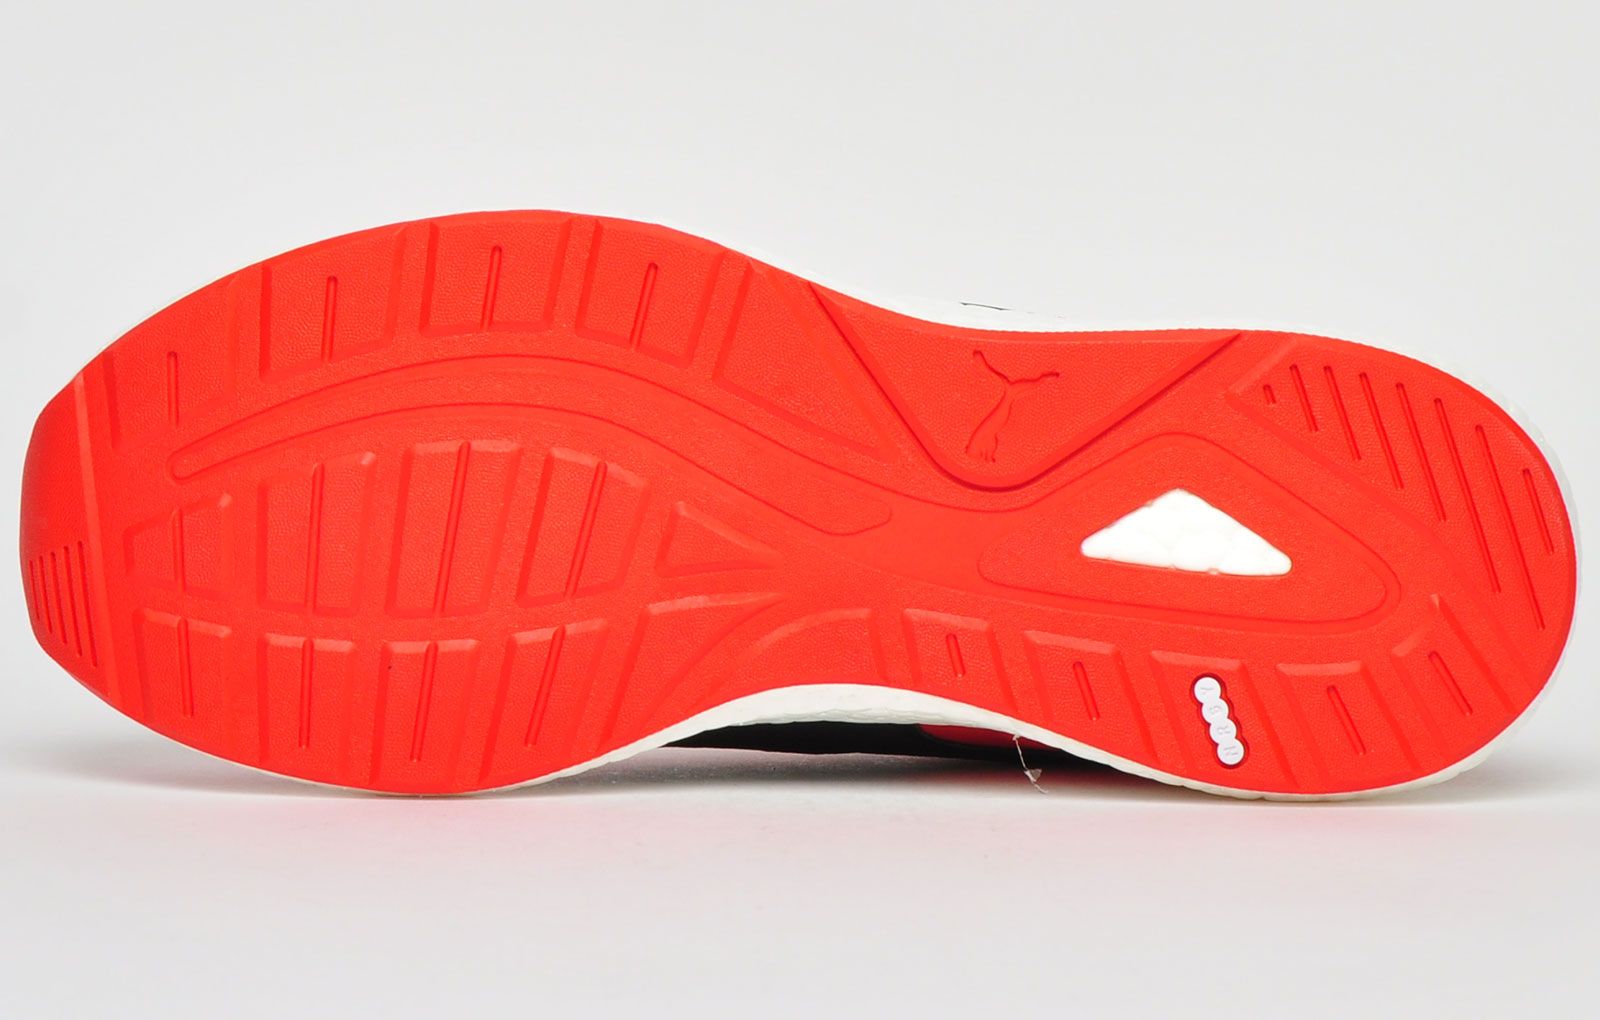 <p>The NRGY Neko Turbo Everfit combines performance and style featuring supportive breathable textile uppers with synthetic overlays that provide protection and structural support for optimal fit while you run or hit the gym.</p> <p>Additional comfort is provided with the PU SoftFoam+ sockliner to give you a premium ride as well as an NRGY Foam midsole enhancing the shoe’s rebound properties increasing the runner’s performance.</p> <p>A padded heel collar complements the shoe to deliver a more convenient, and optimal step-in comfort finished with a full-length durable carbon rubber outsole to provide traction and grip on varied surfaces.</p> <p>- Textile mesh upper</p> <p>- Everfit lace-through caging provides added midfoot support</p> <p>- SoftFoam+ sockliner</p> <p>- NRGY Foam bounce back midsole</p> <p>- Full-length durable carbon rubber outsole</p> <p>- Padded collar with heel tab</p> <p>- Puma branding throughout</p>